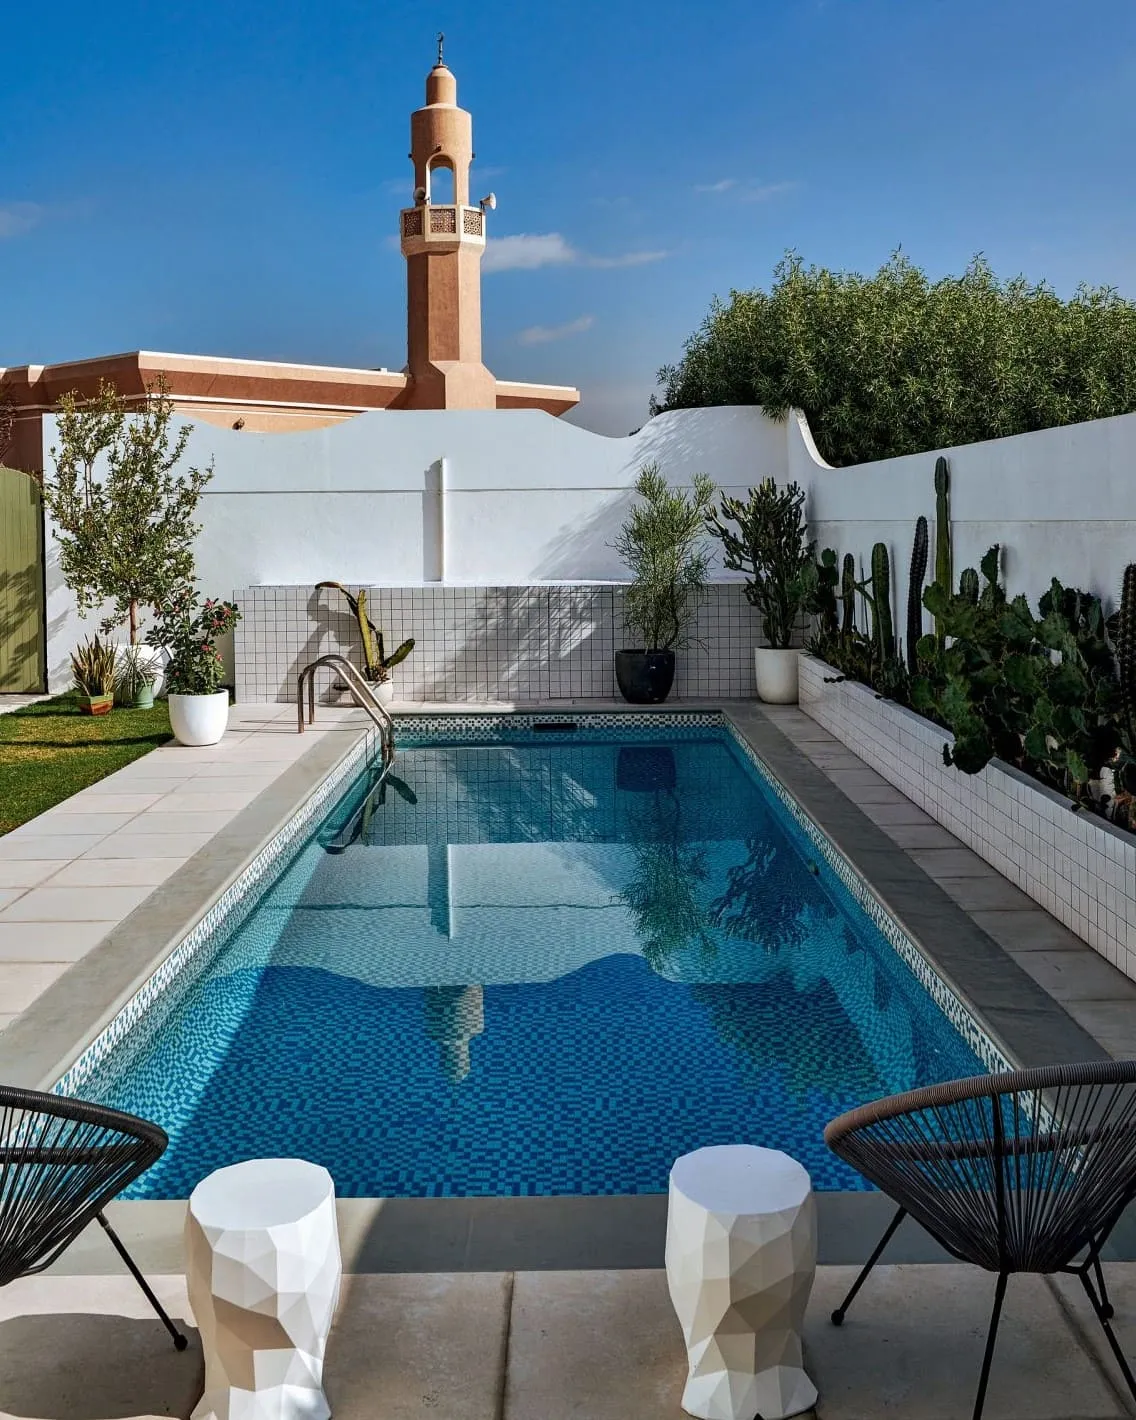 The pool area of the mediterranean house